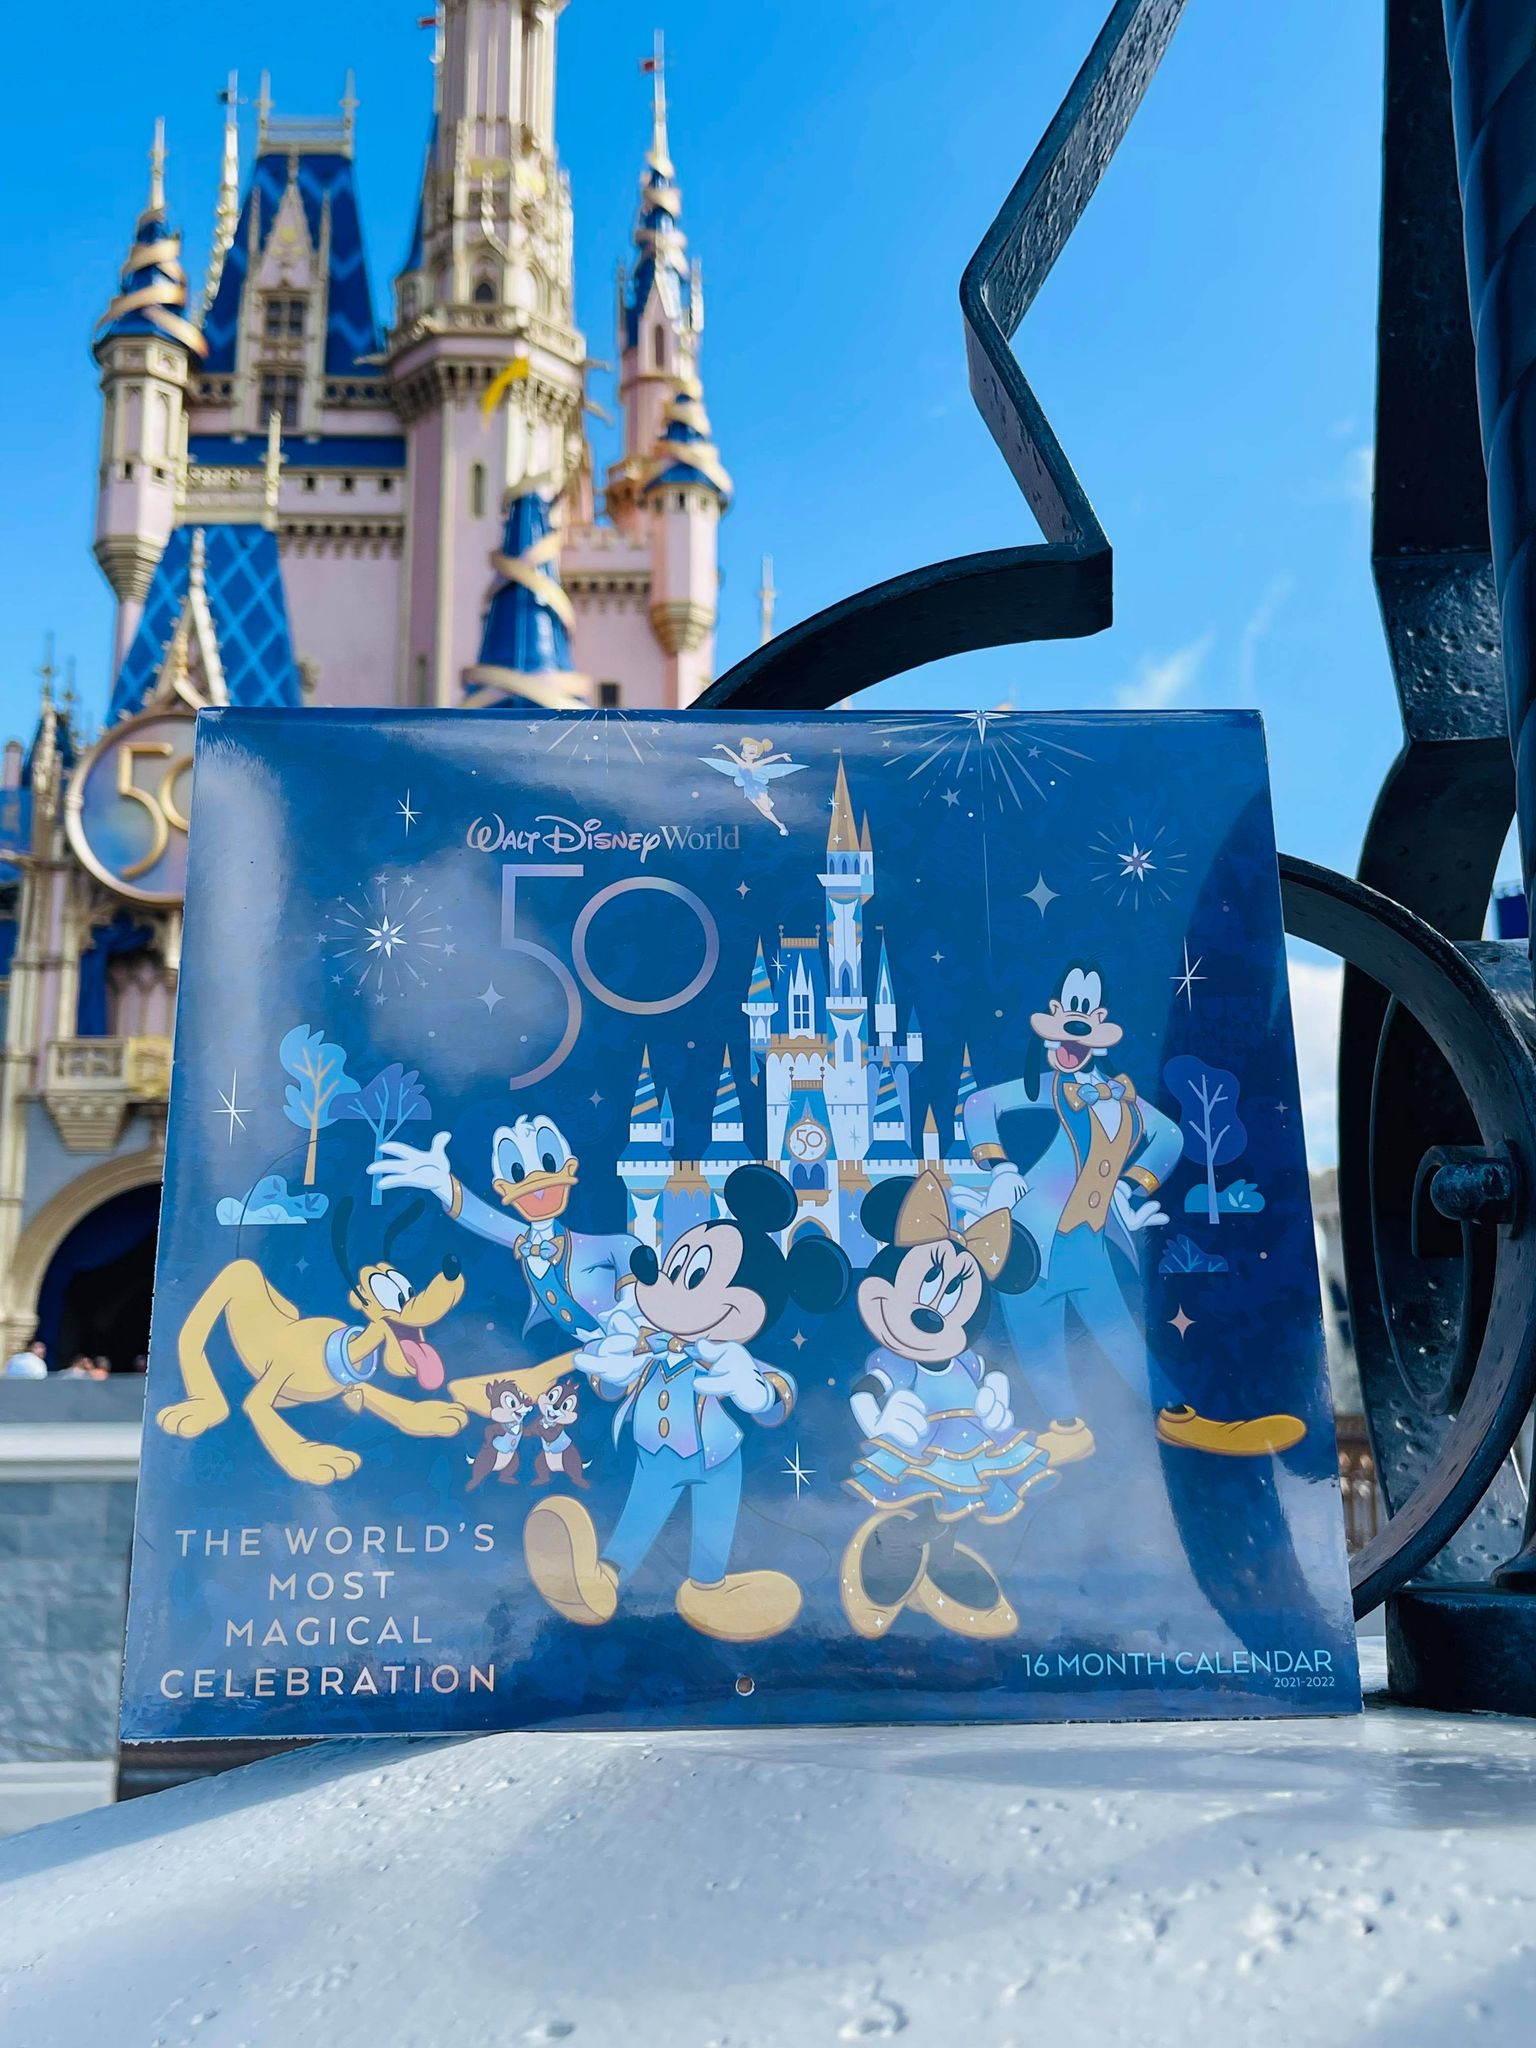 Countdown The Days To Disney World's 50th Anniversary With This NEW